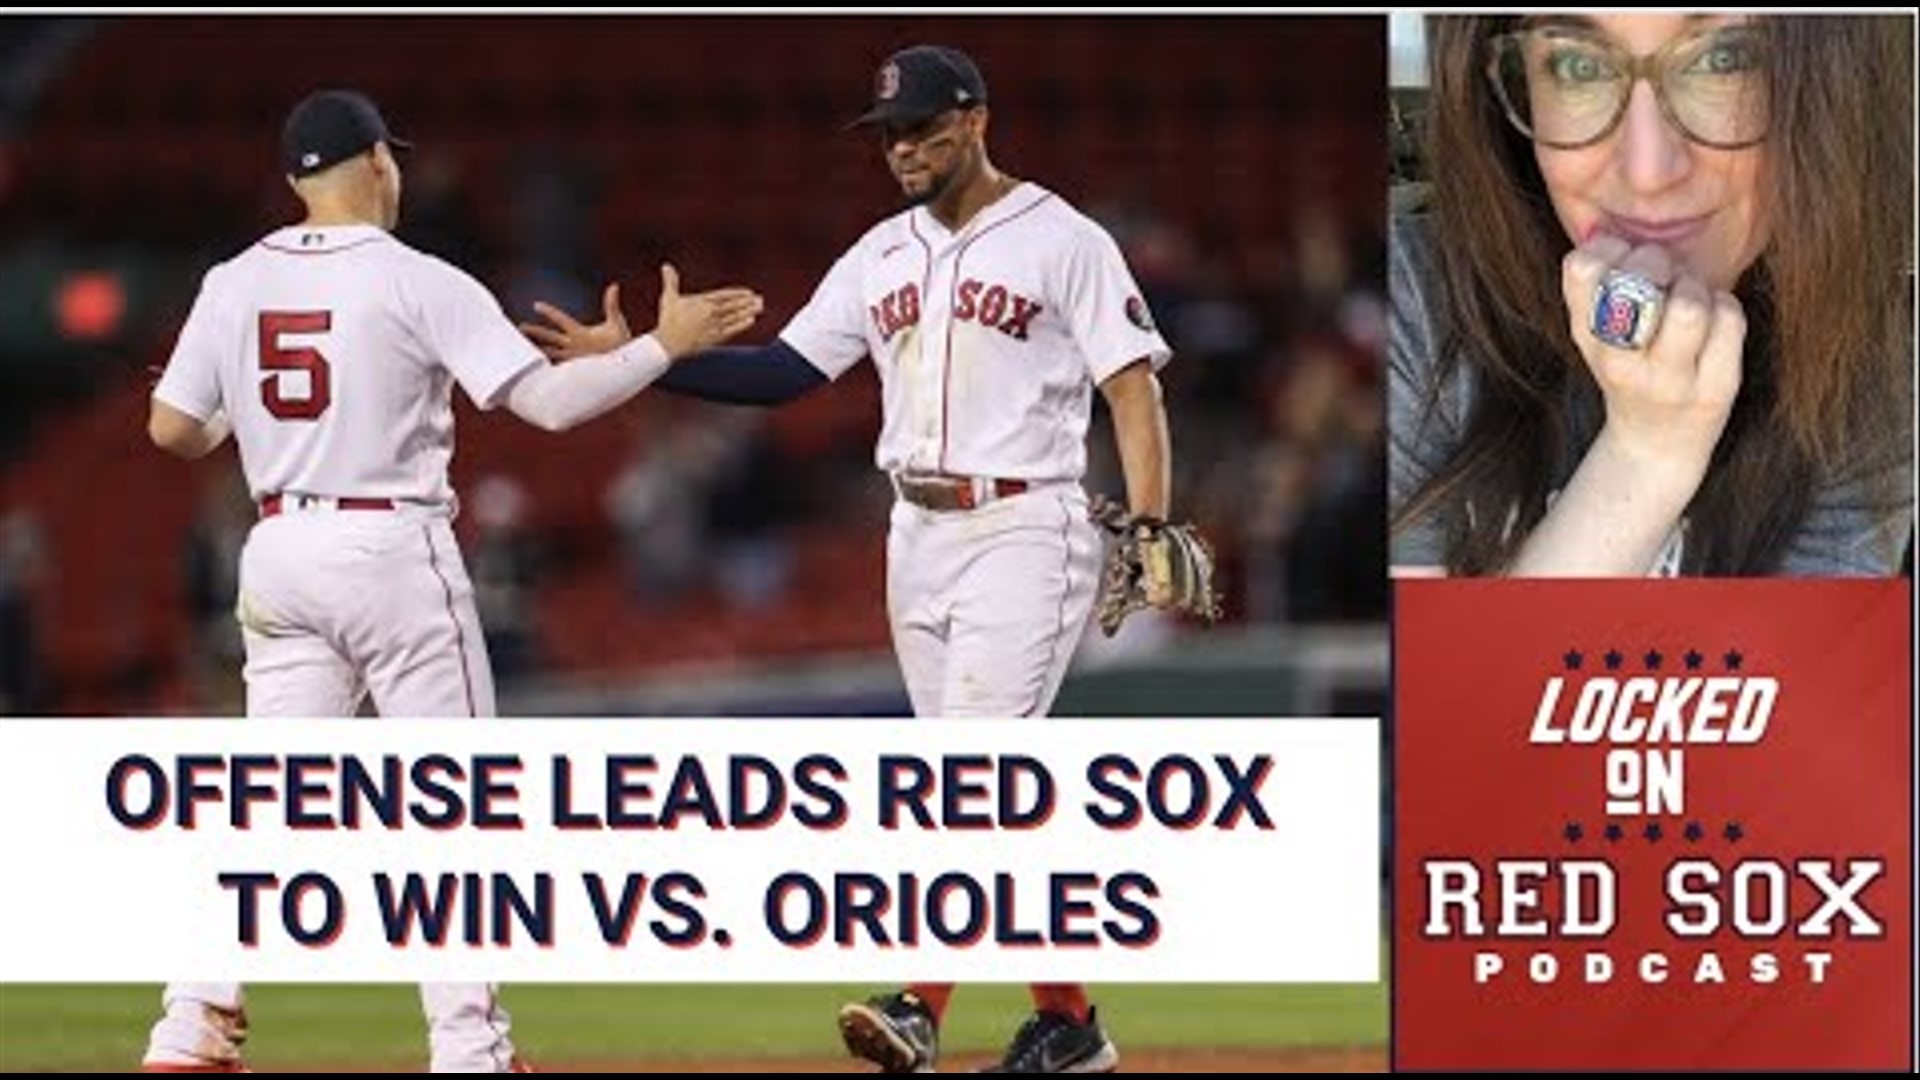 Michael Wacha didn't have his best performance but the Boston Red Sox put up 13 runs in the 13-9 win over the Baltimore Orioles on Tuesday night at Fenway Park.